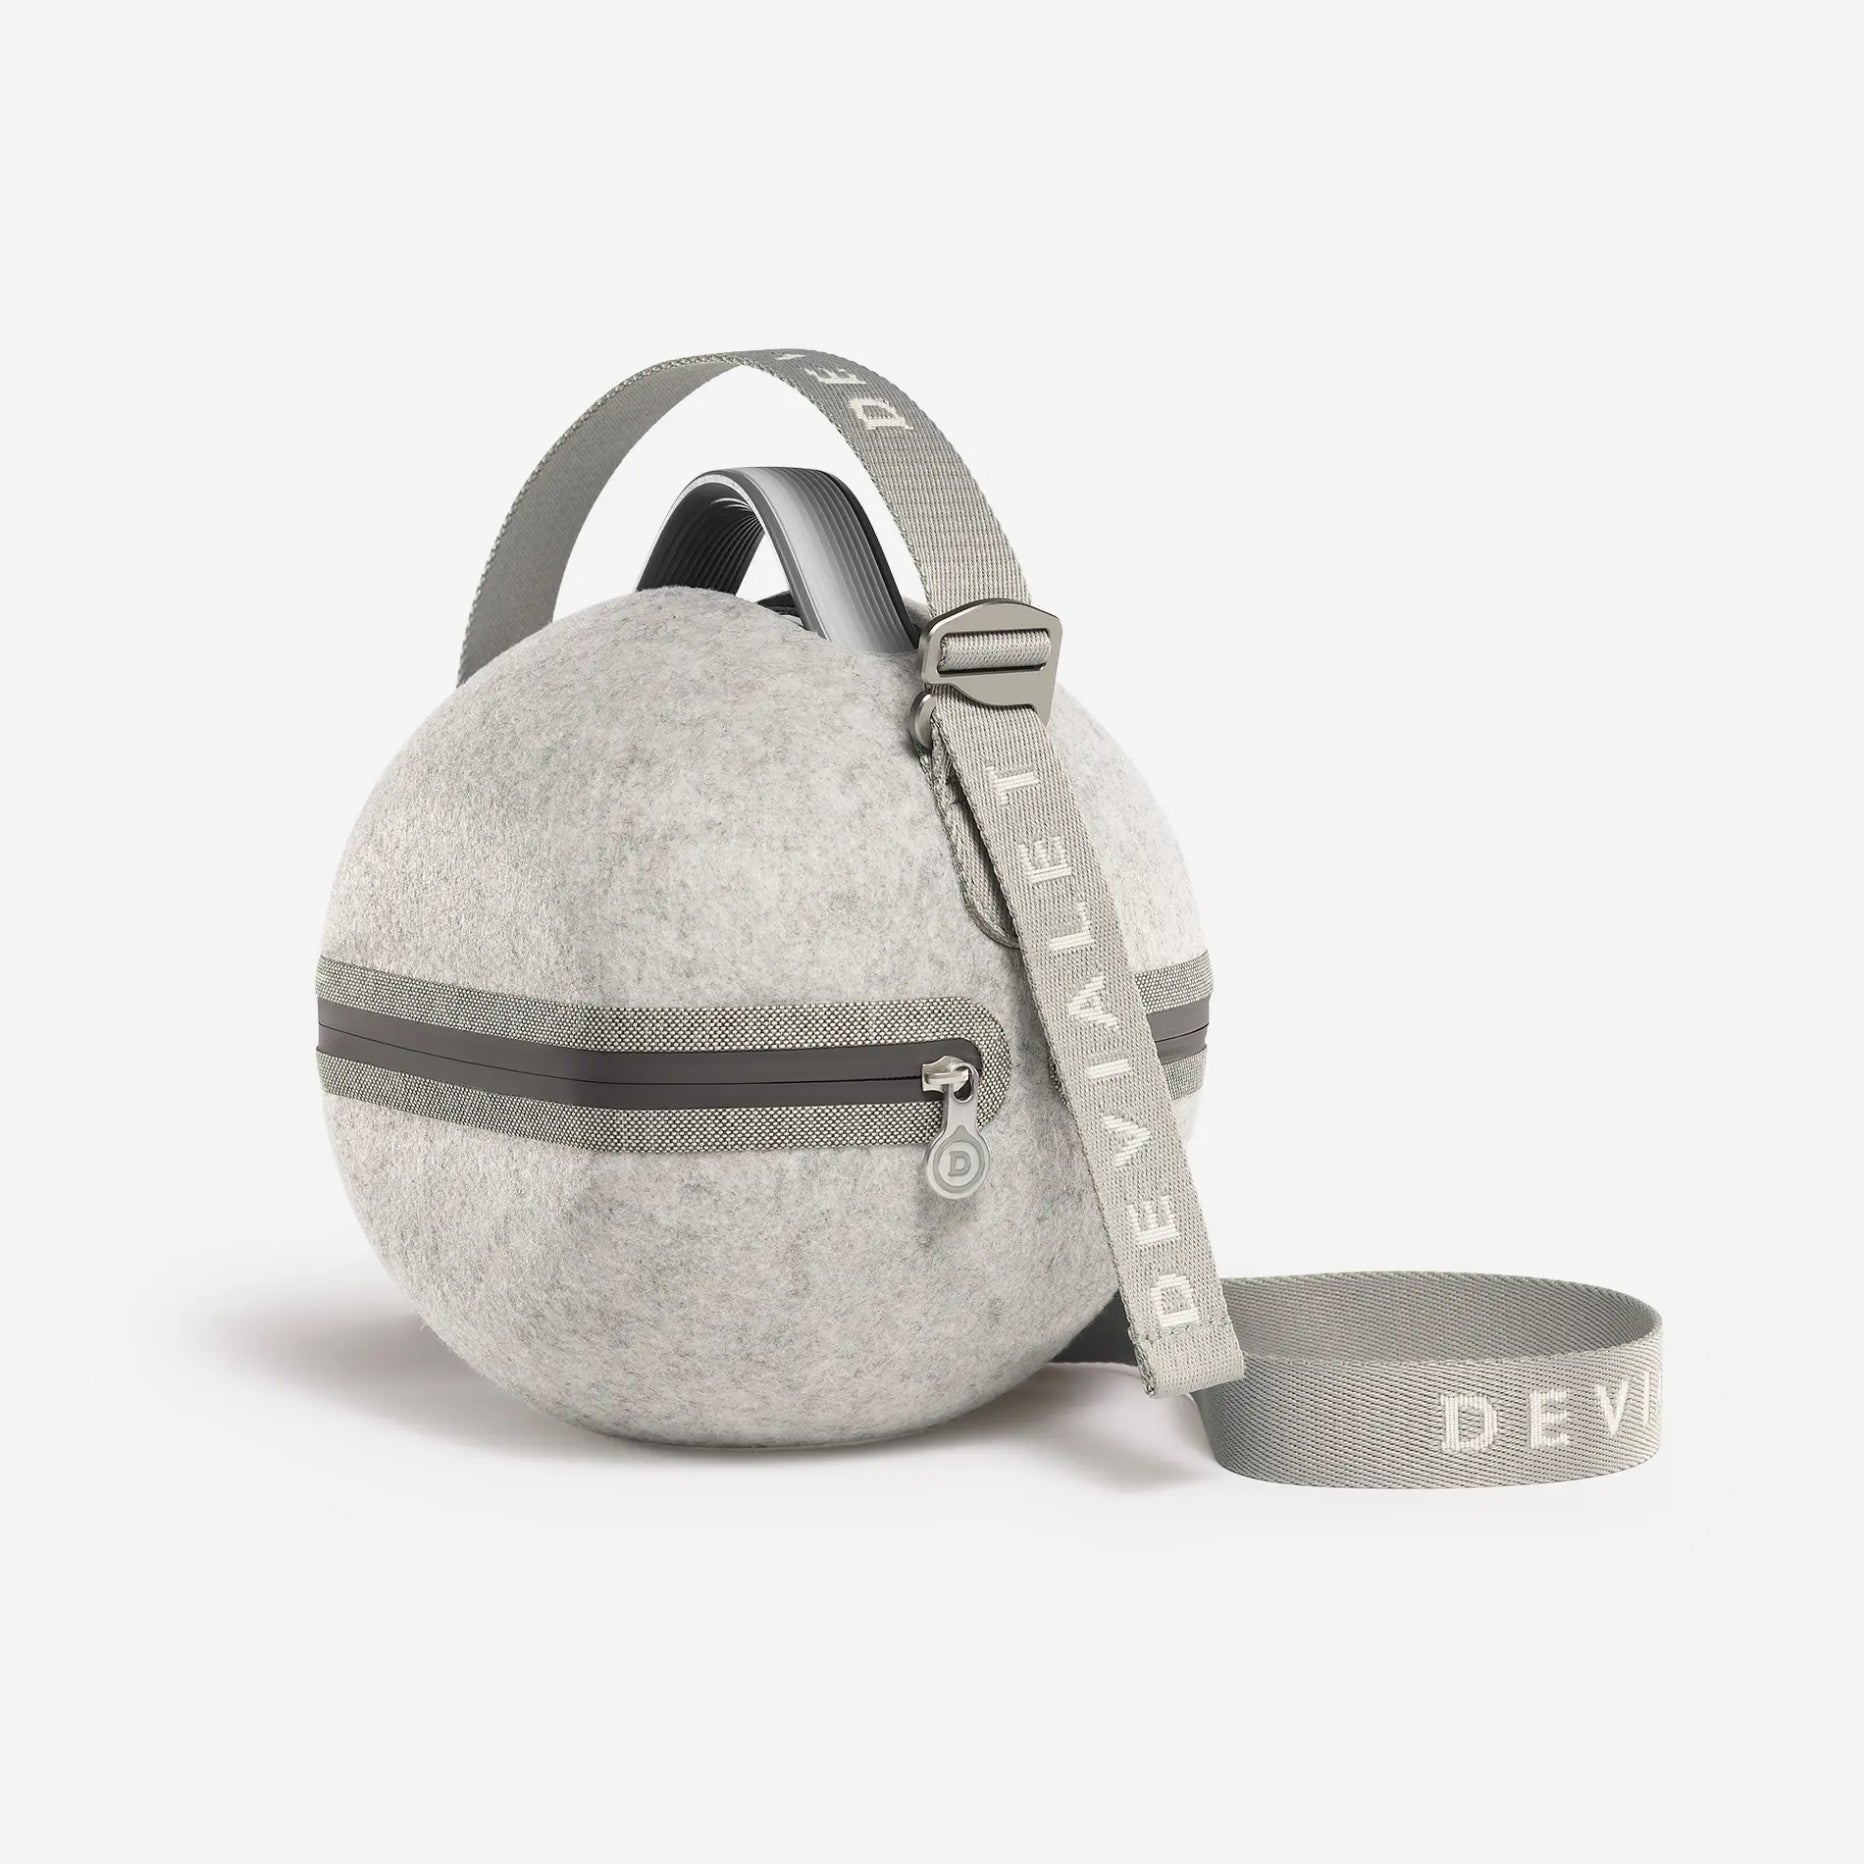 Devialet Cocoon Carry Case for Mania Speaker